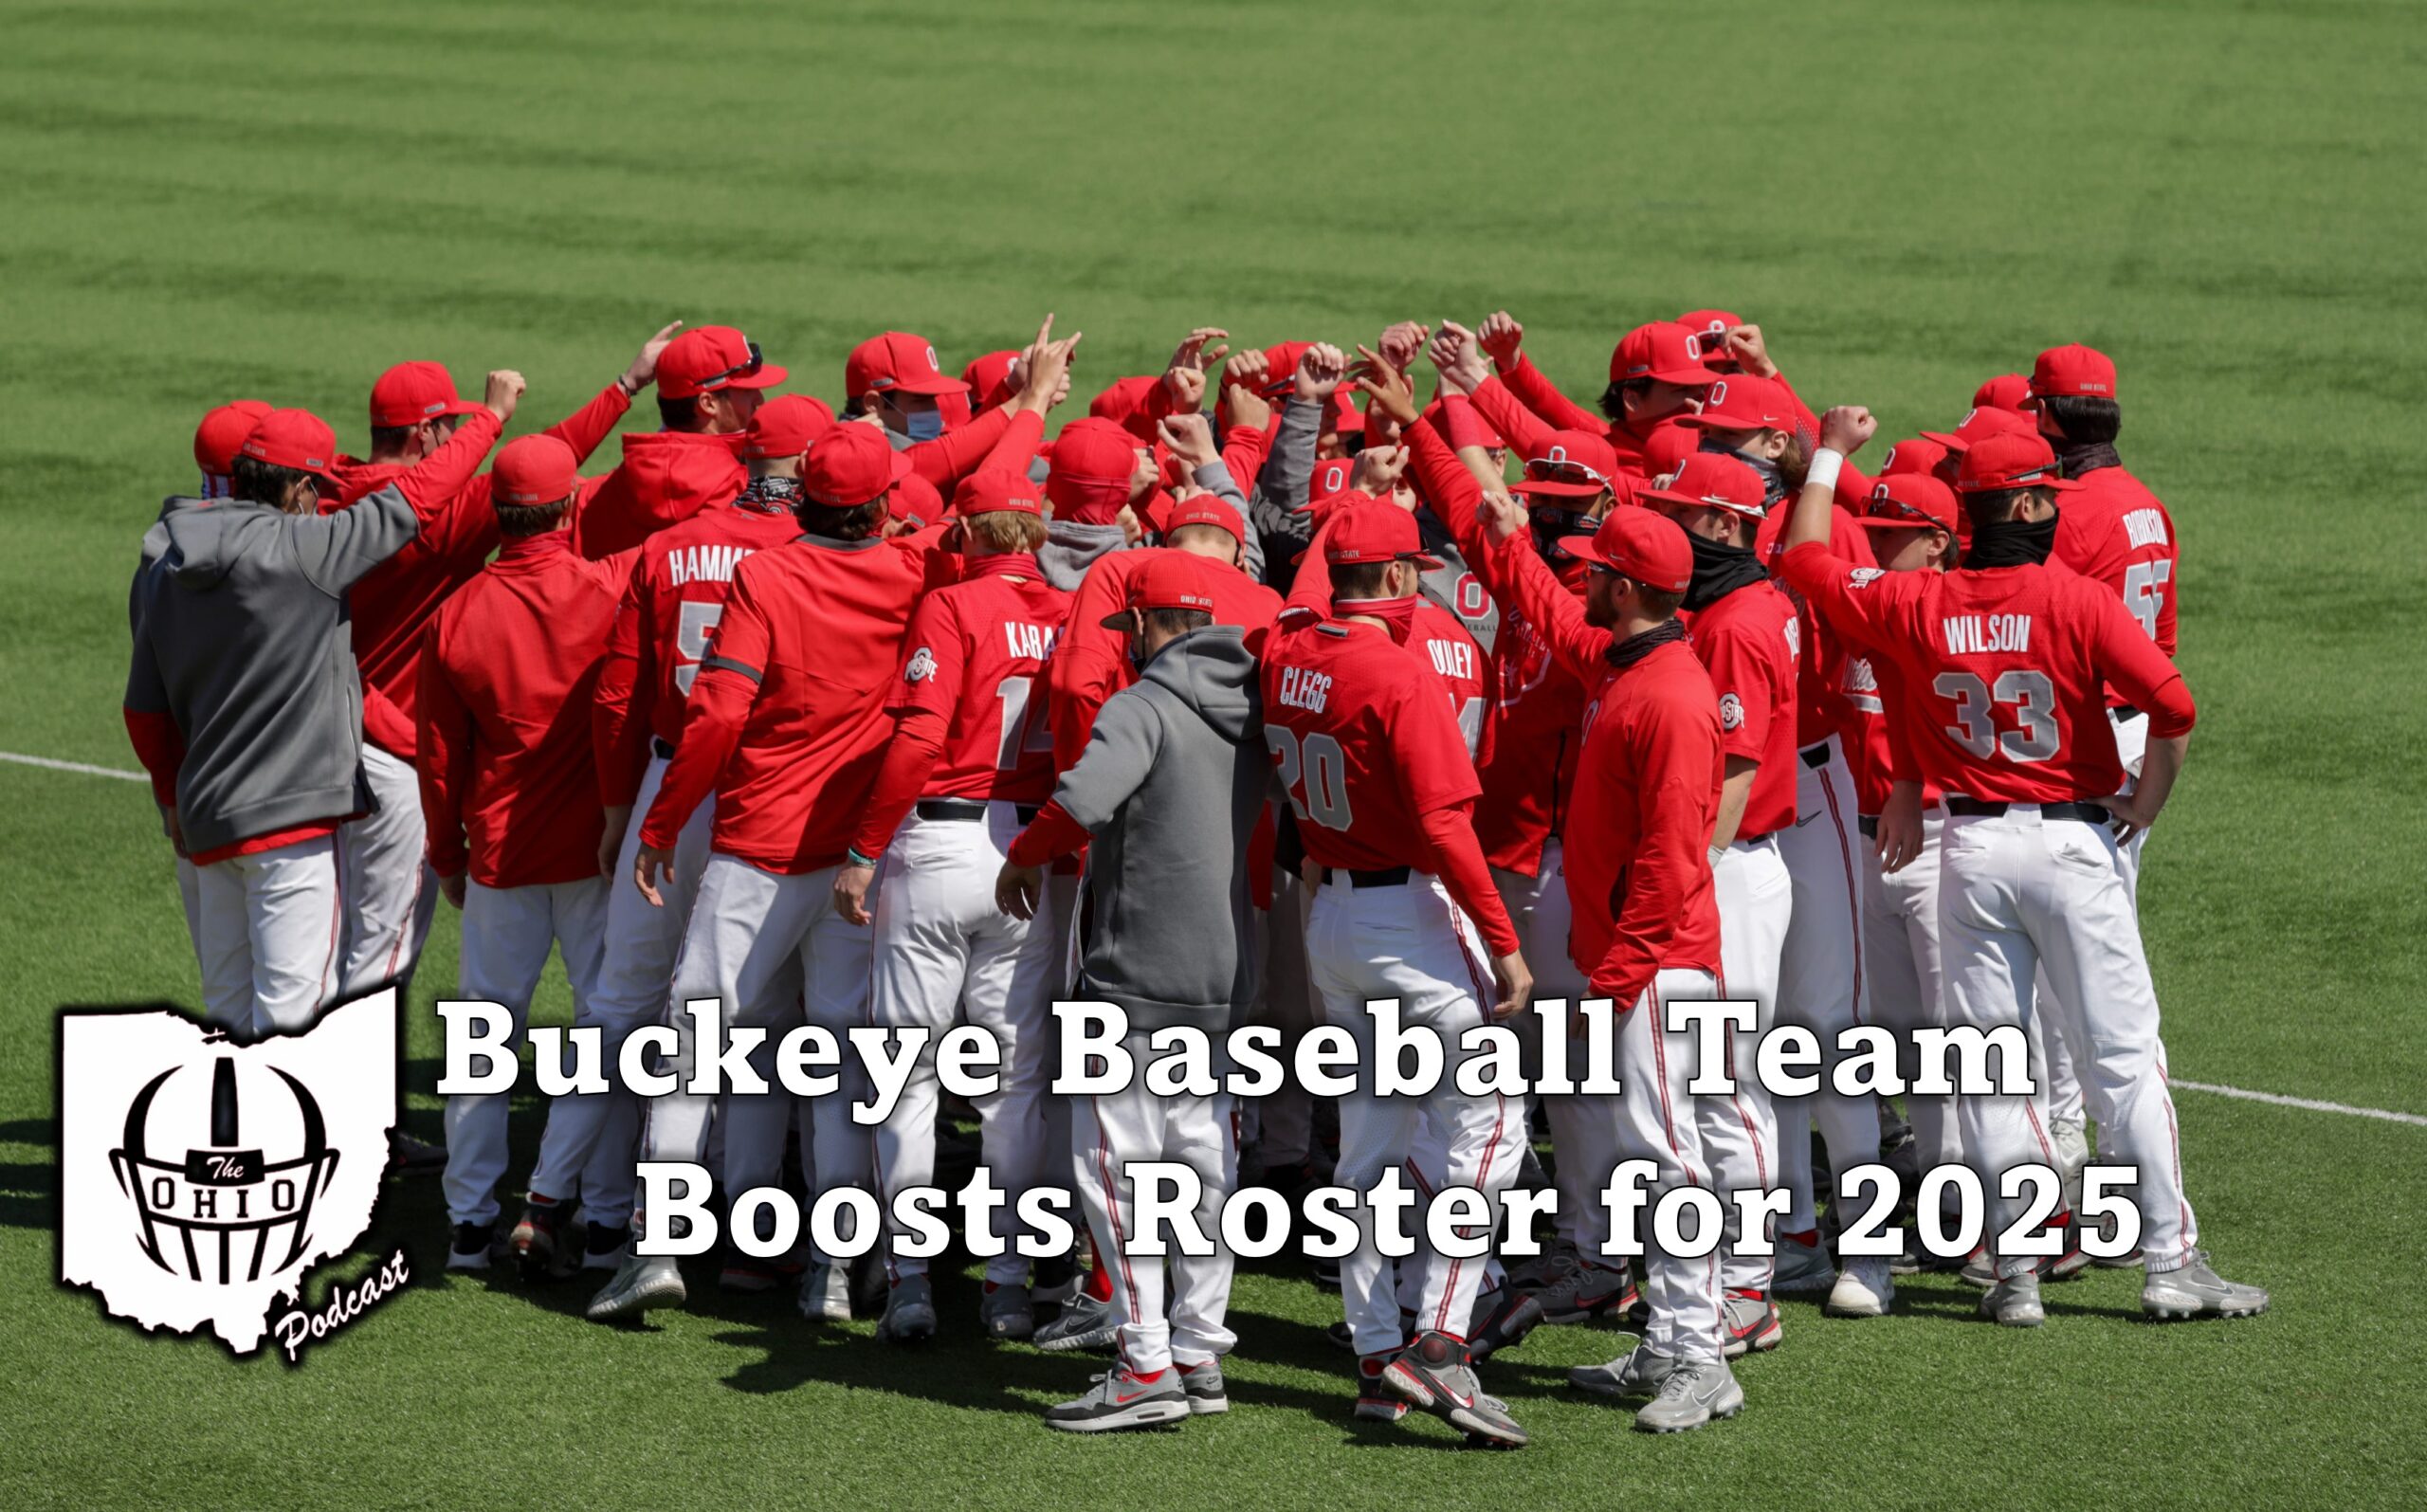 Ohio State Baseball Boosts Roster with Key Additions